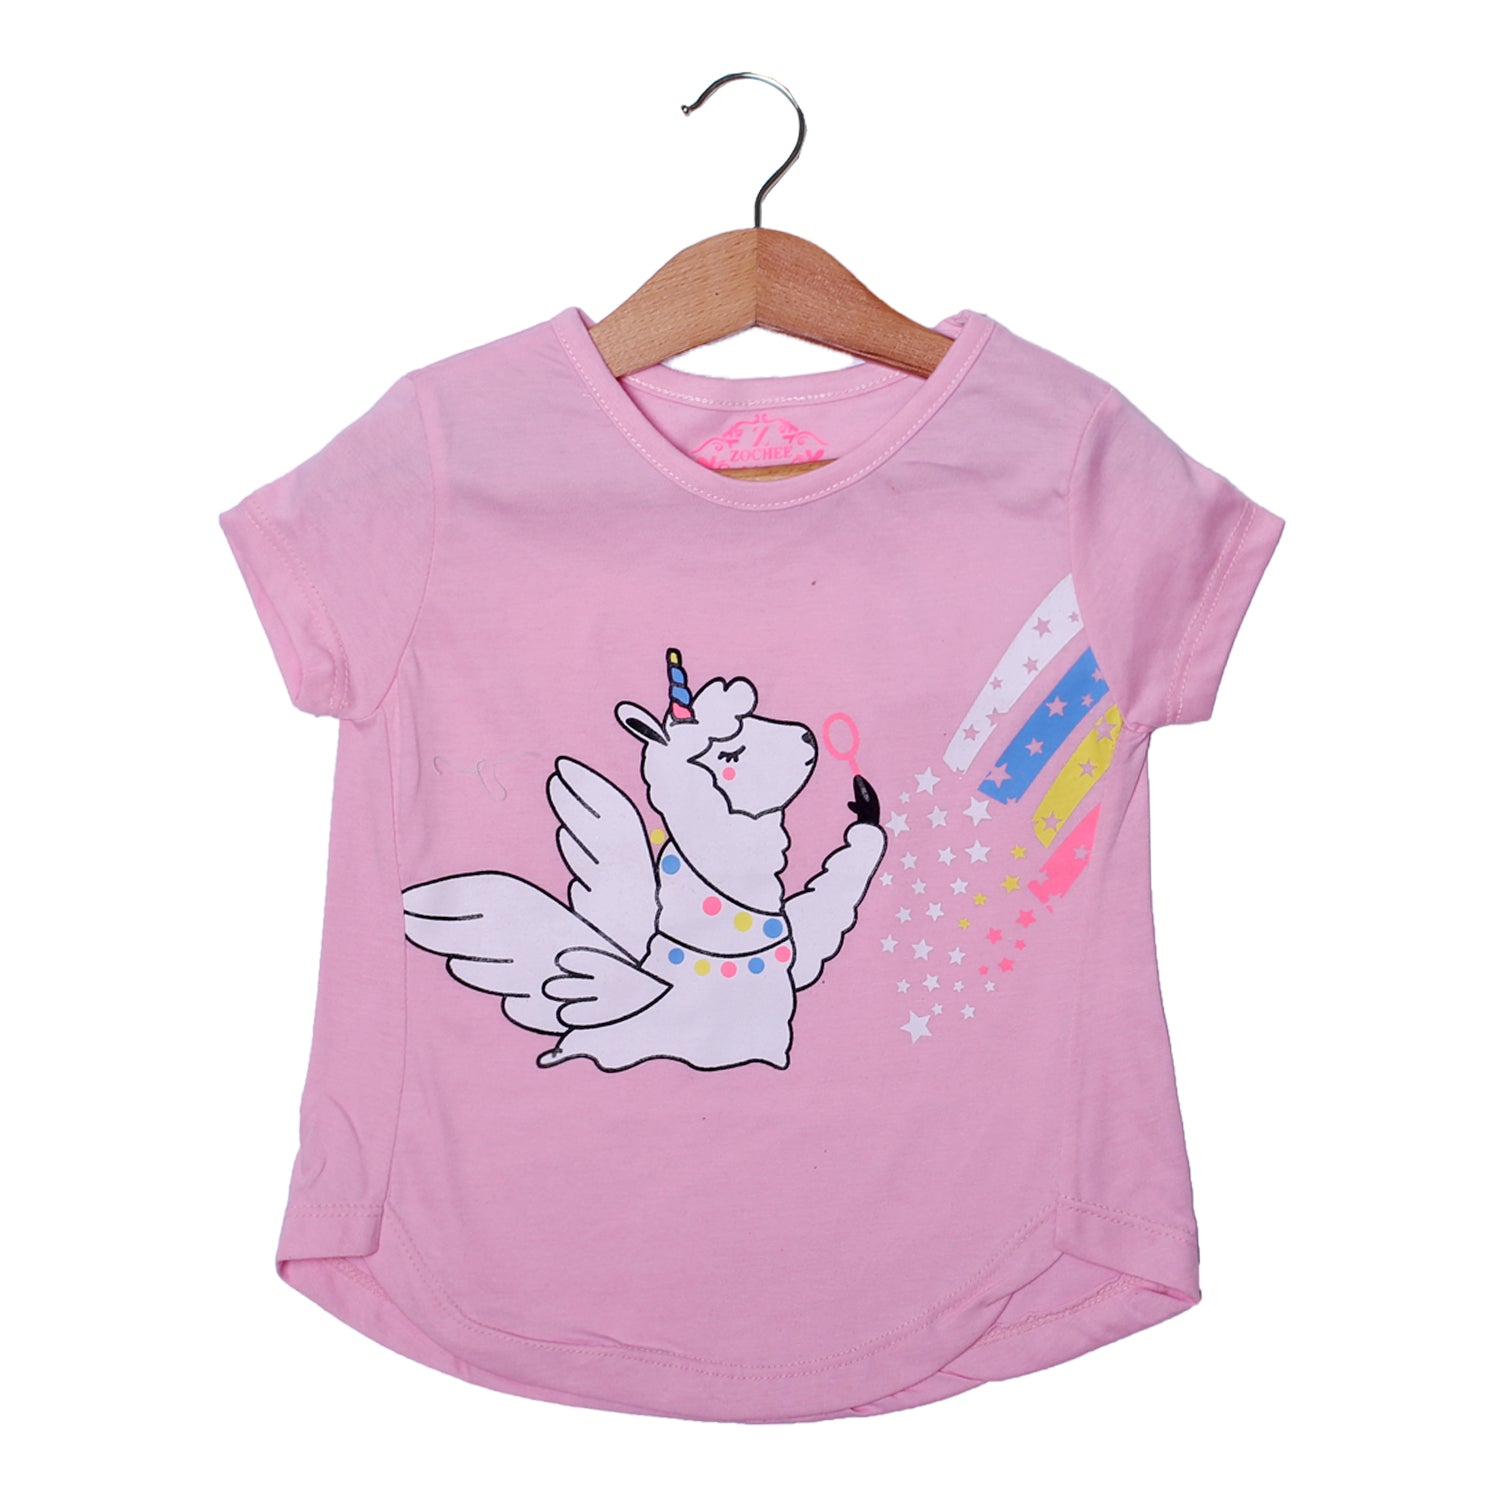 NEW PINK SHEEP WITH WINGS PRINTED T-SHIRT FOR GIRLS